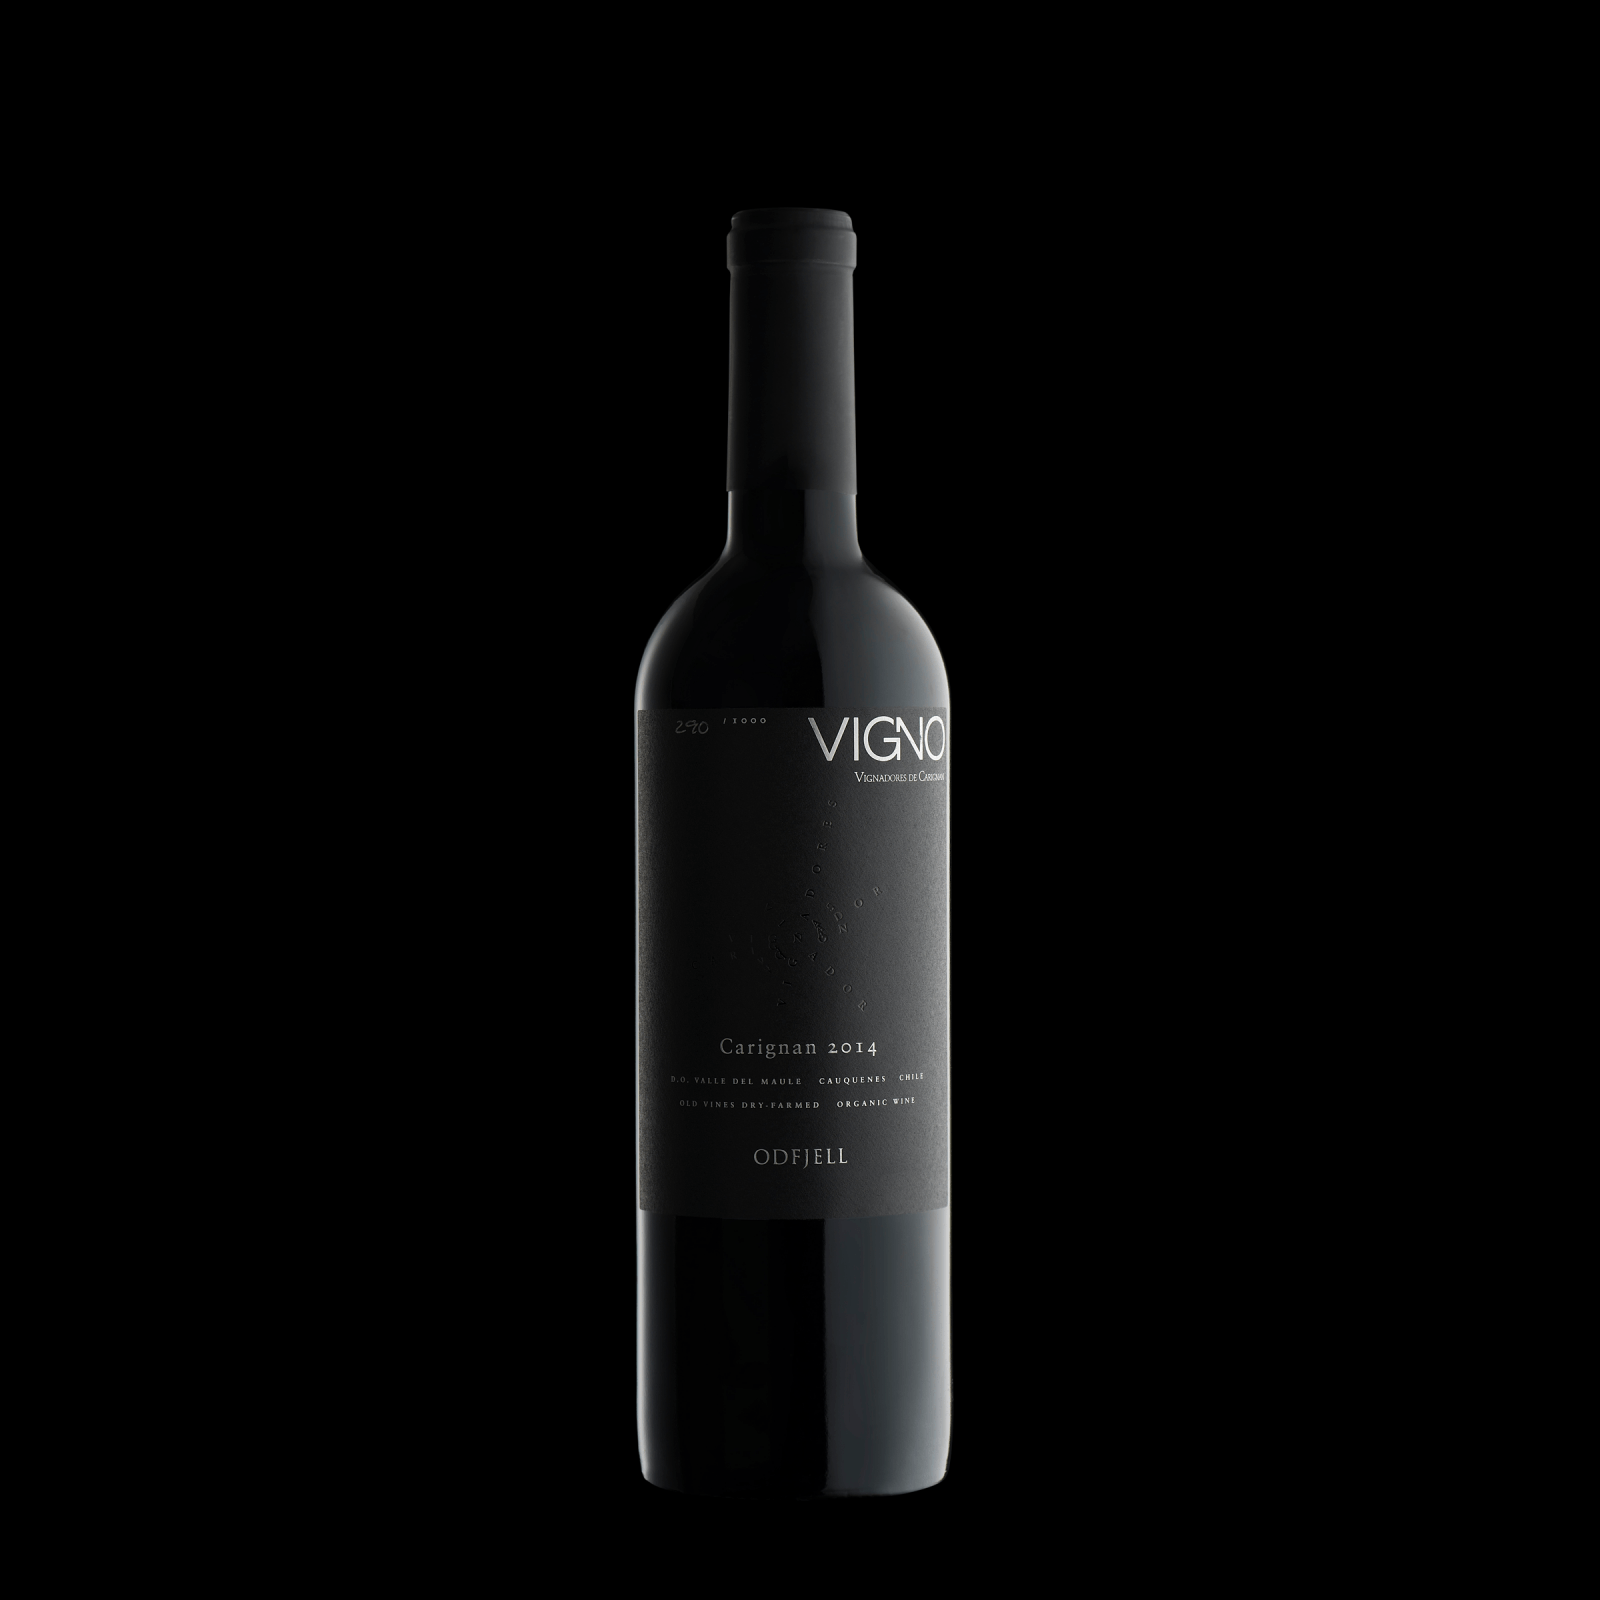 Packaging Design for Limited Edition “Vigno” Carignan Wine